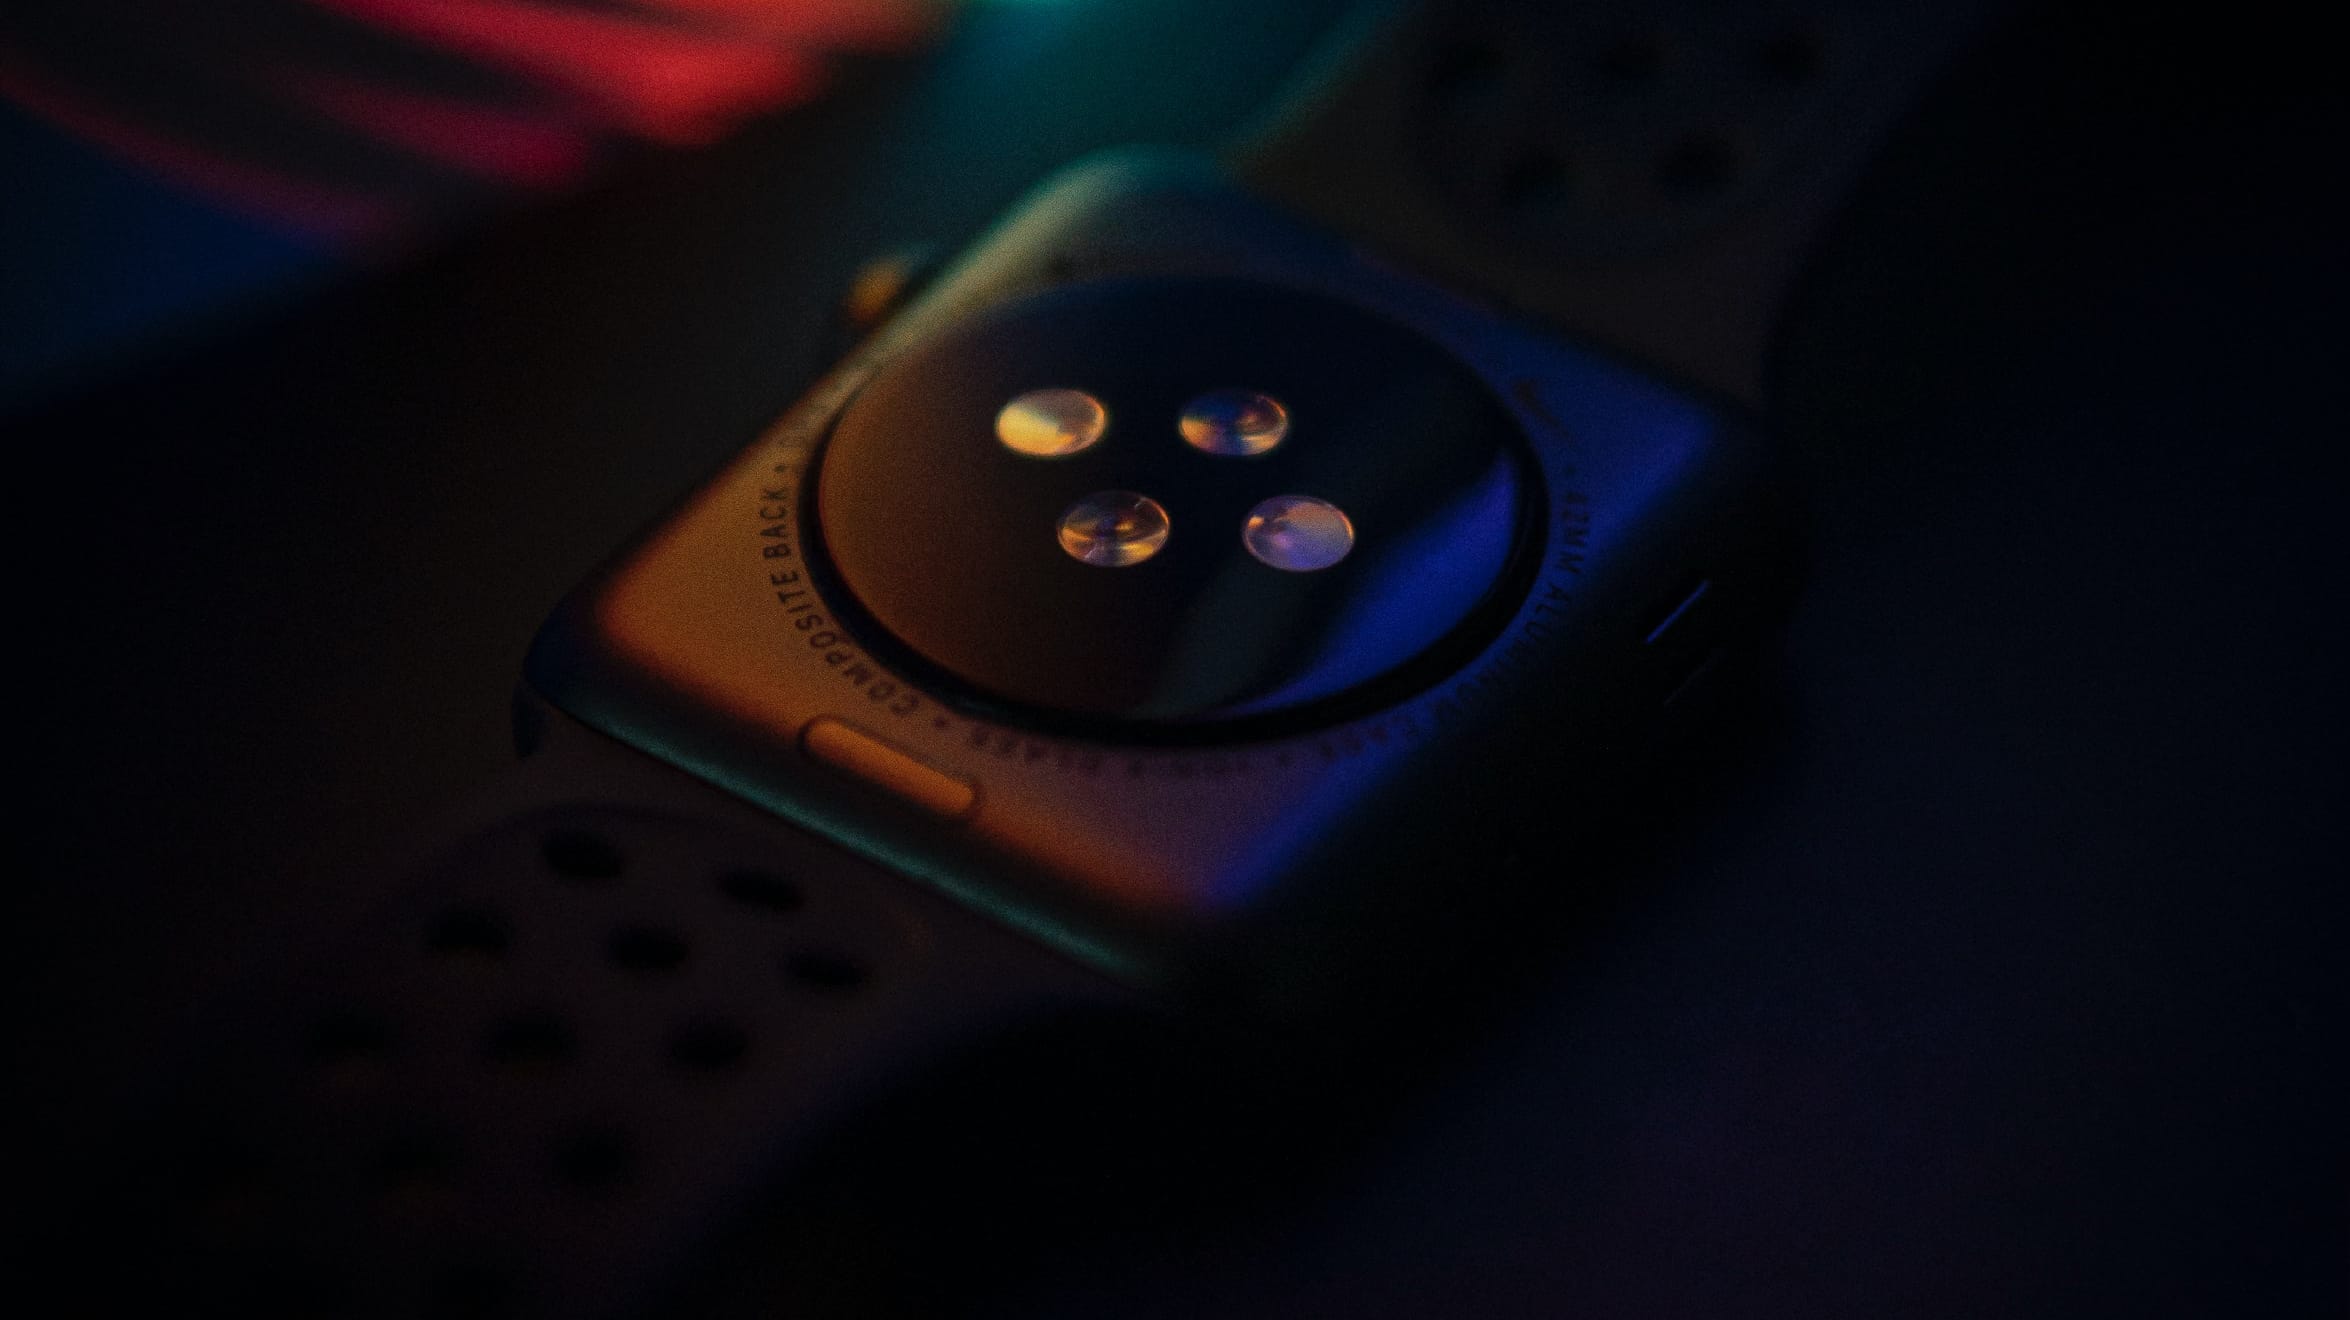 Apple Watch Series 7 laid facedown, with the optical heart rate sensor on its back crystal exposed